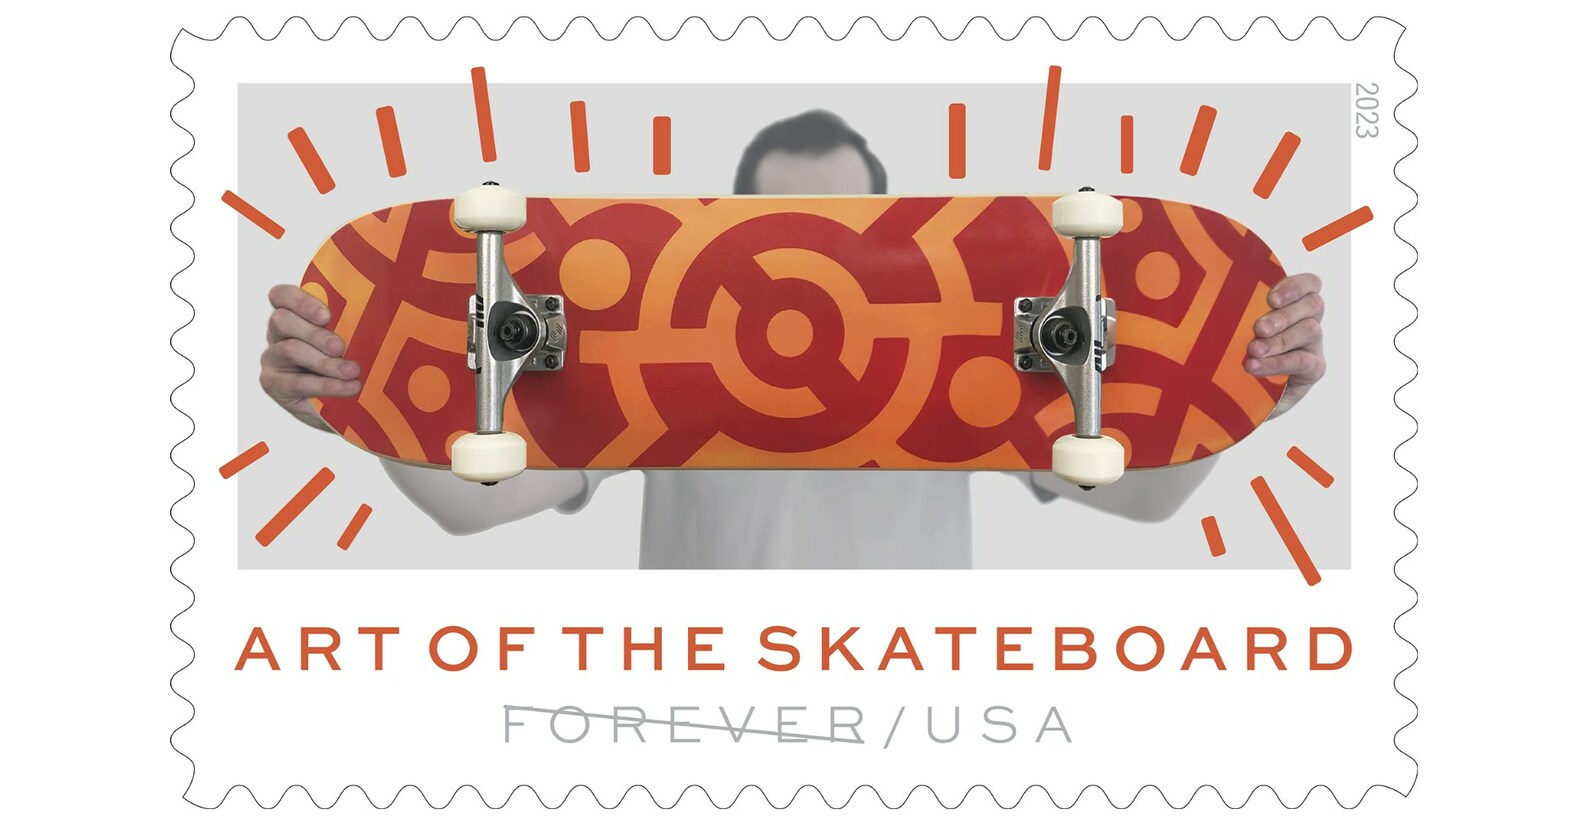 USPS Releases Art of the Skateboard Stamps